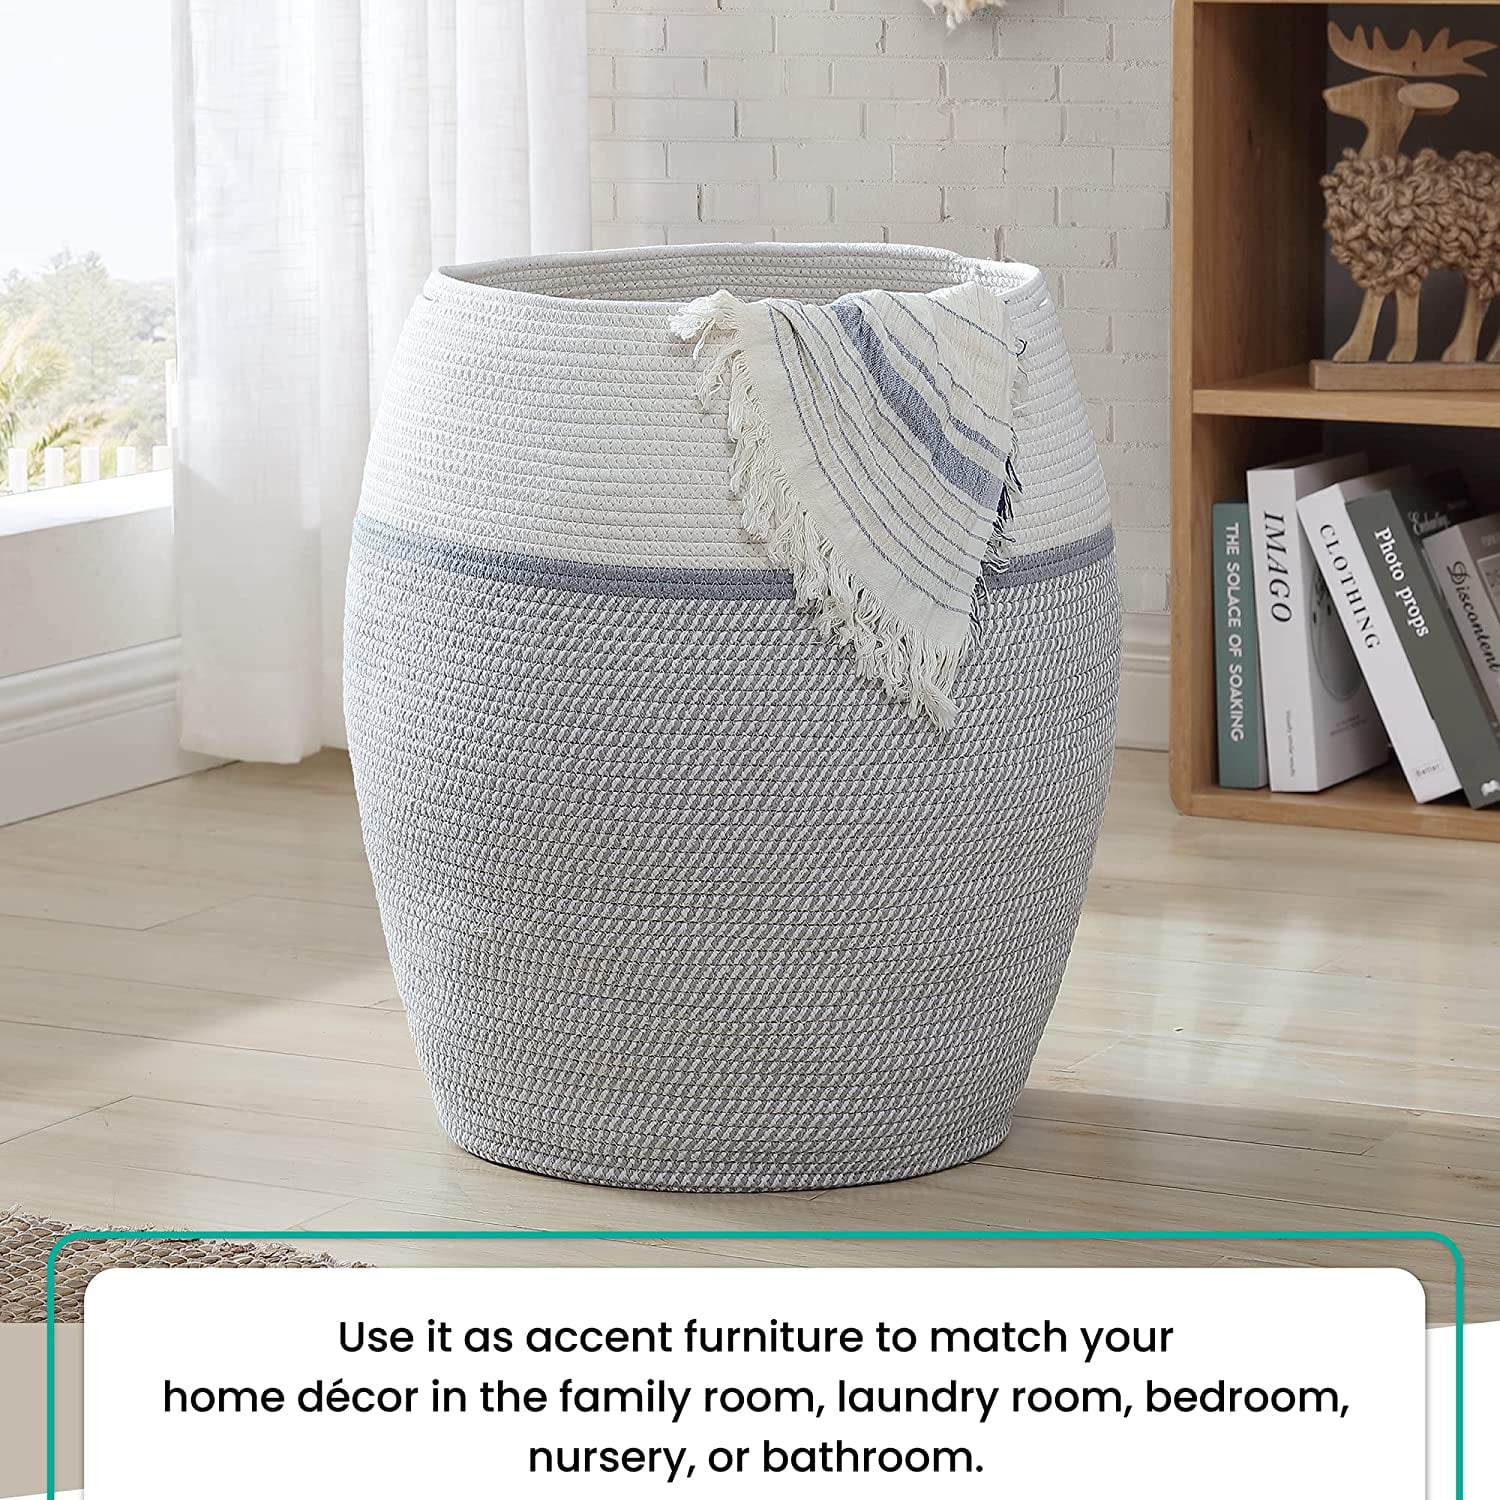 Toy Storage Bin Woven Laundry Hamper with Cover Cotton Rope Storage Baskets 26 x 20 Tall Extra Large Storage Basket with Lid for Toys Blanket in Living Room Baby Nursery White/Grey 